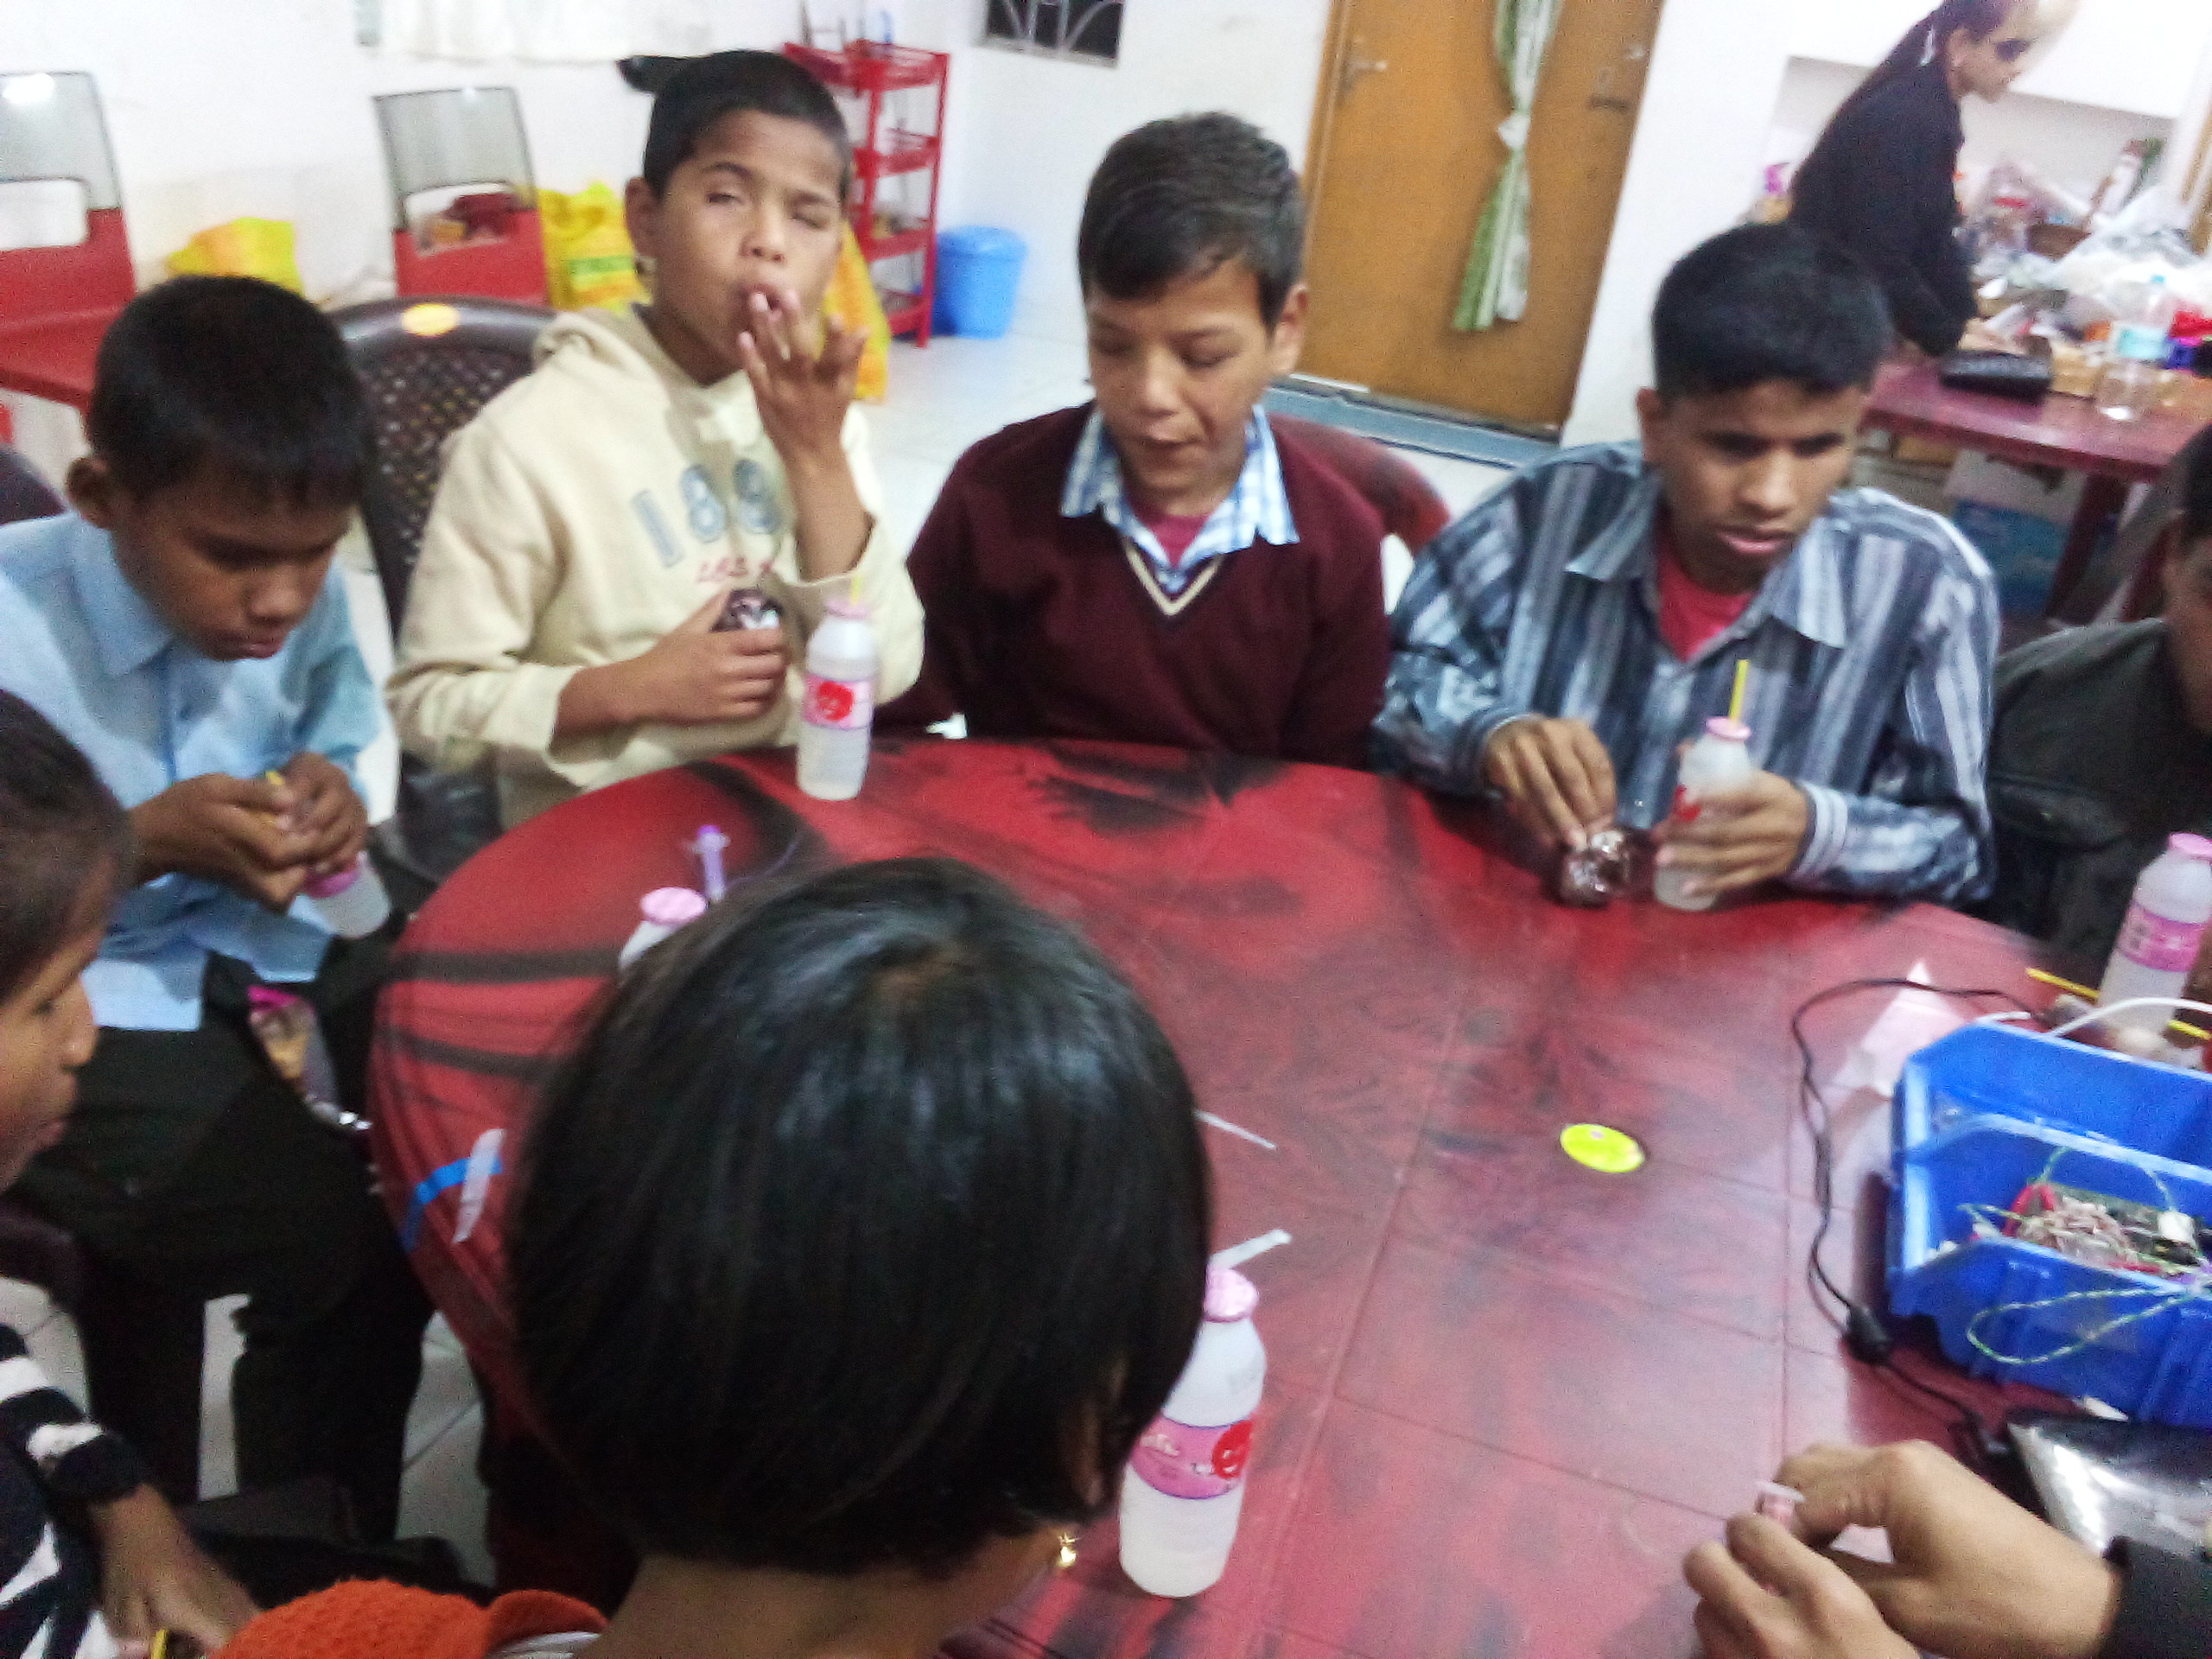 photo: children sitting around a table  and having snacks - 2